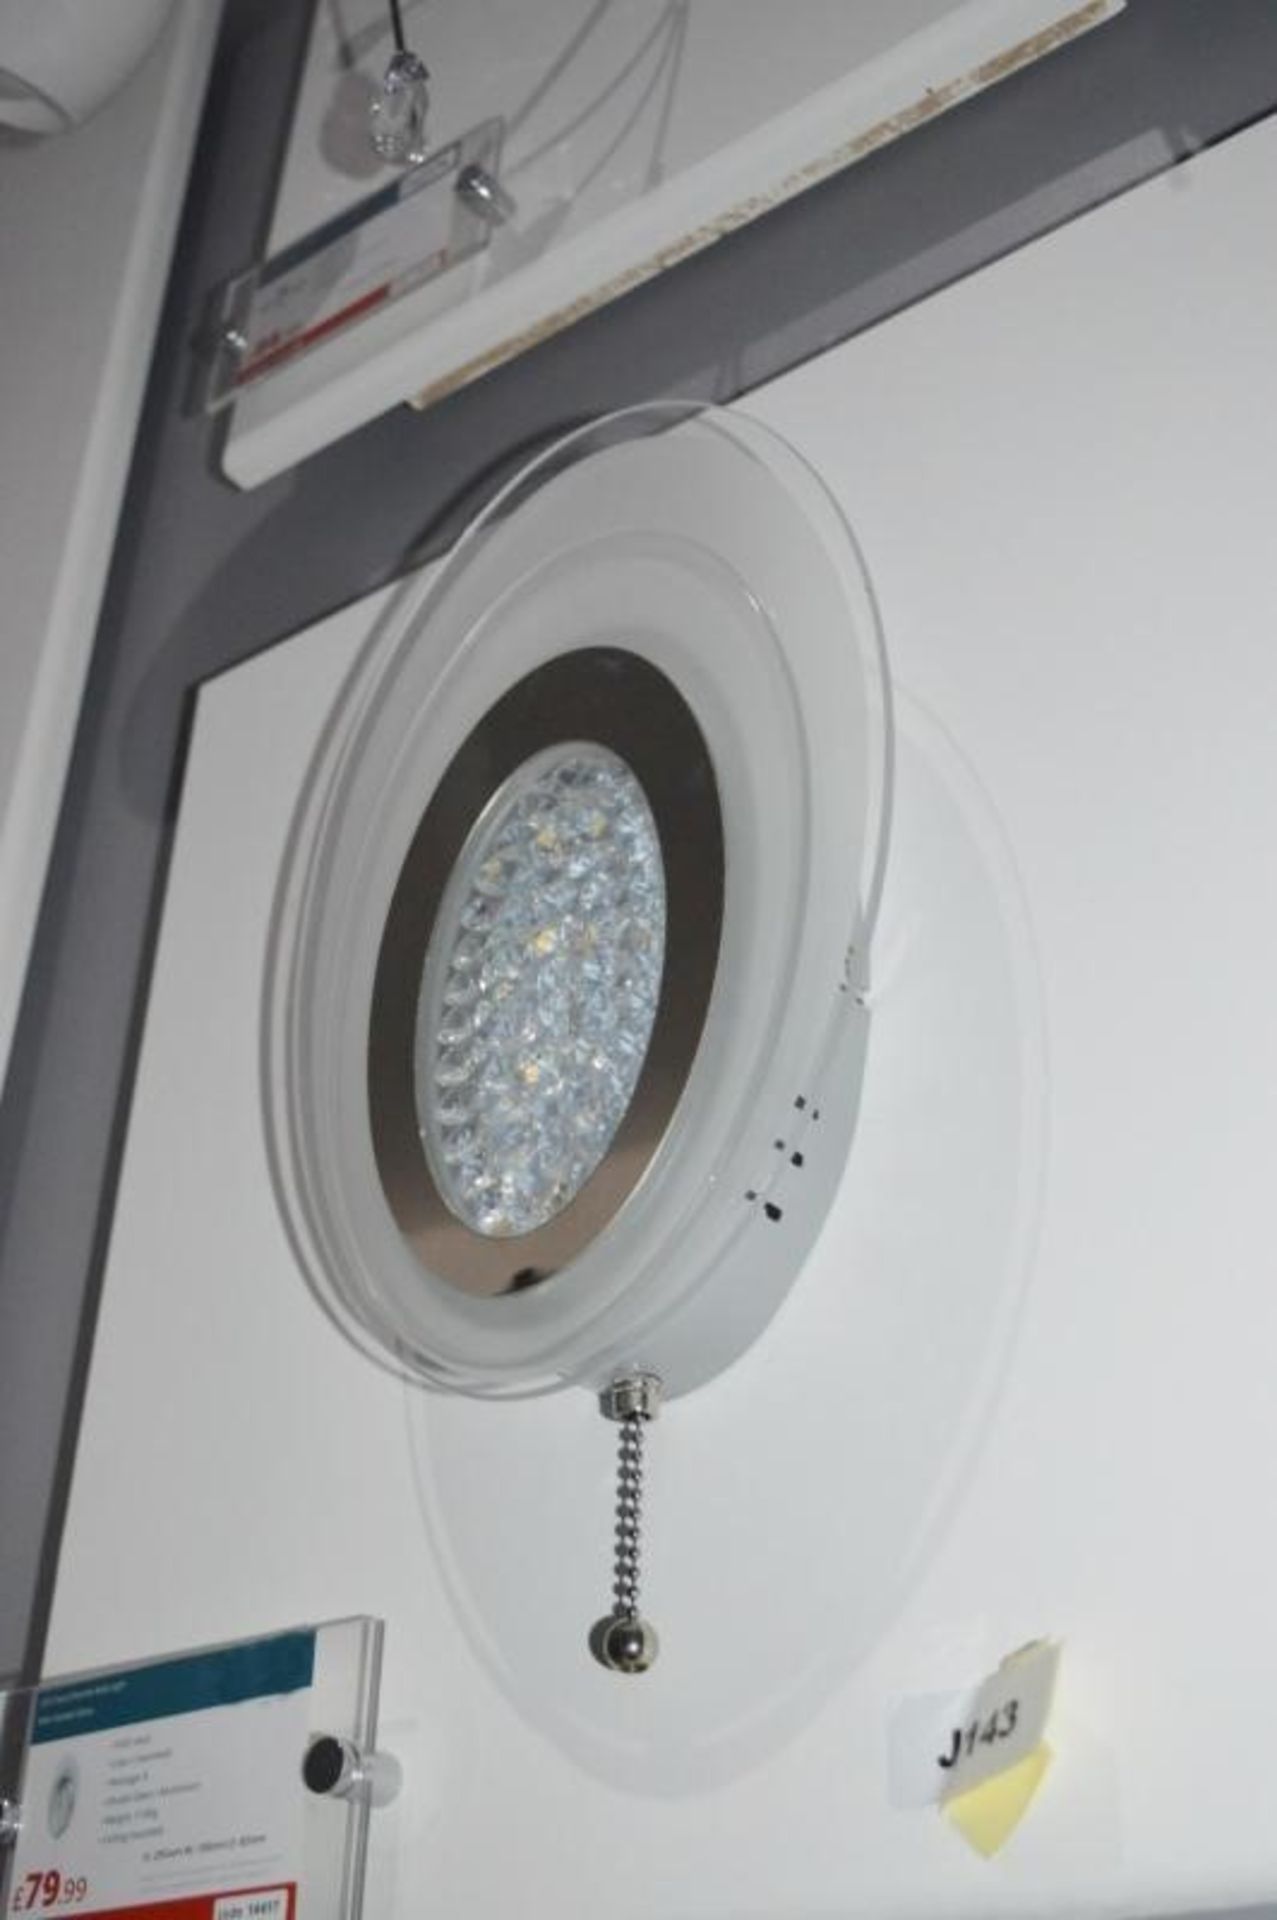 1 x LED Oval Chrome Wall Light With Frosted Glass - Ex Display Stock - CL298 - Ref J143 - Location: - Image 2 of 5